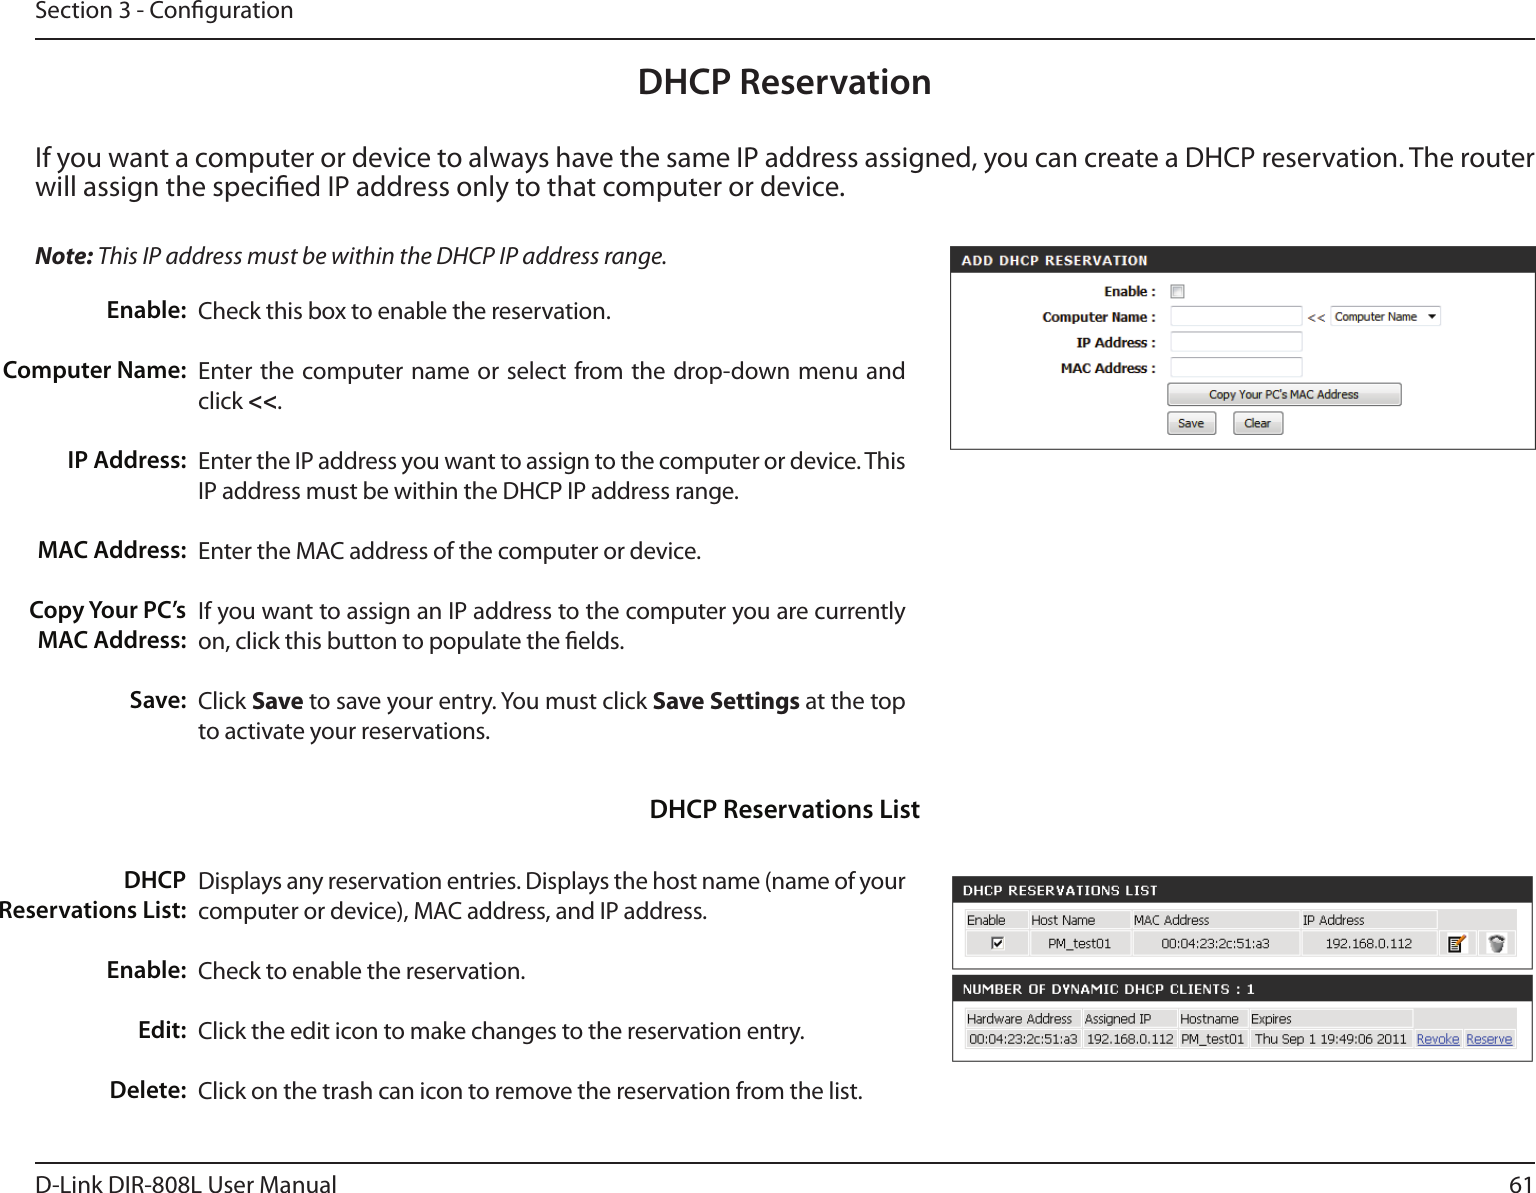 61D-Link DIR-808L User ManualSection 3 - CongurationDHCP ReservationIf you want a computer or device to always have the same IP address assigned, you can create a DHCP reservation. The router will assign the specied IP address only to that computer or device. Note: This IP address must be within the DHCP IP address range.Check this box to enable the reservation.Enter the computer name or select from the drop-down menu and click &lt;&lt;.Enter the IP address you want to assign to the computer or device. This IP address must be within the DHCP IP address range.Enter the MAC address of the computer or device.If you want to assign an IP address to the computer you are currently on, click this button to populate the elds. Click Save to save your entry. You must click Save Settings at the top to activate your reservations. Displays any reservation entries. Displays the host name (name of your computer or device), MAC address, and IP address.Check to enable the reservation.Click the edit icon to make changes to the reservation entry.Click on the trash can icon to remove the reservation from the list.Enable:Computer Name:IP Address:MAC Address:Copy Your PC’s MAC Address:Save:DHCP Reservations List:Enable:Edit:Delete:DHCP Reservations List